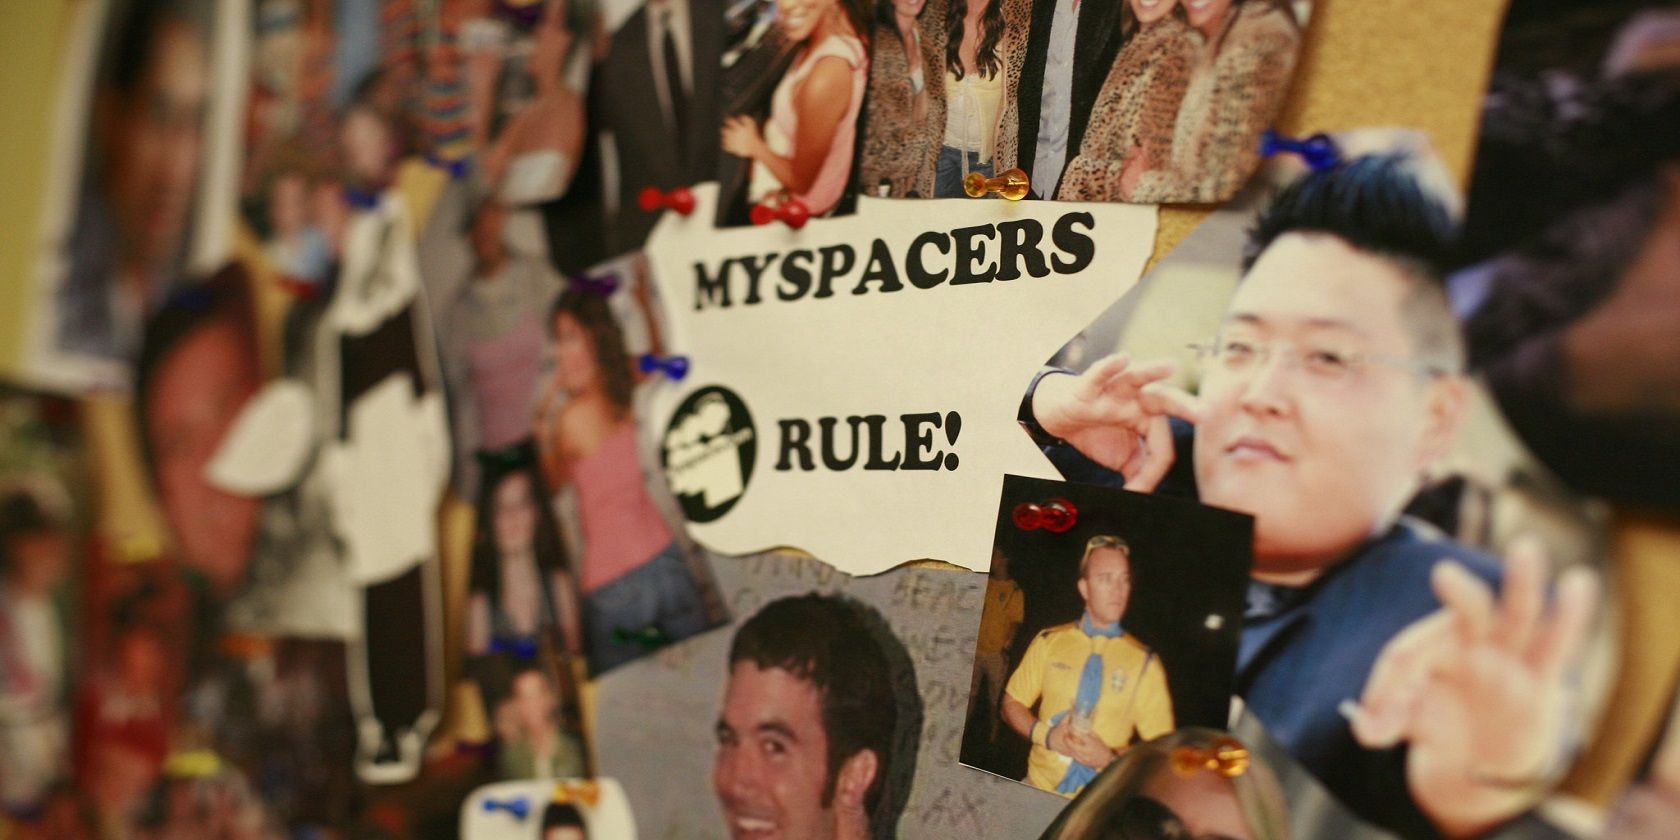 Myspacers Rule corkboard and photo collage